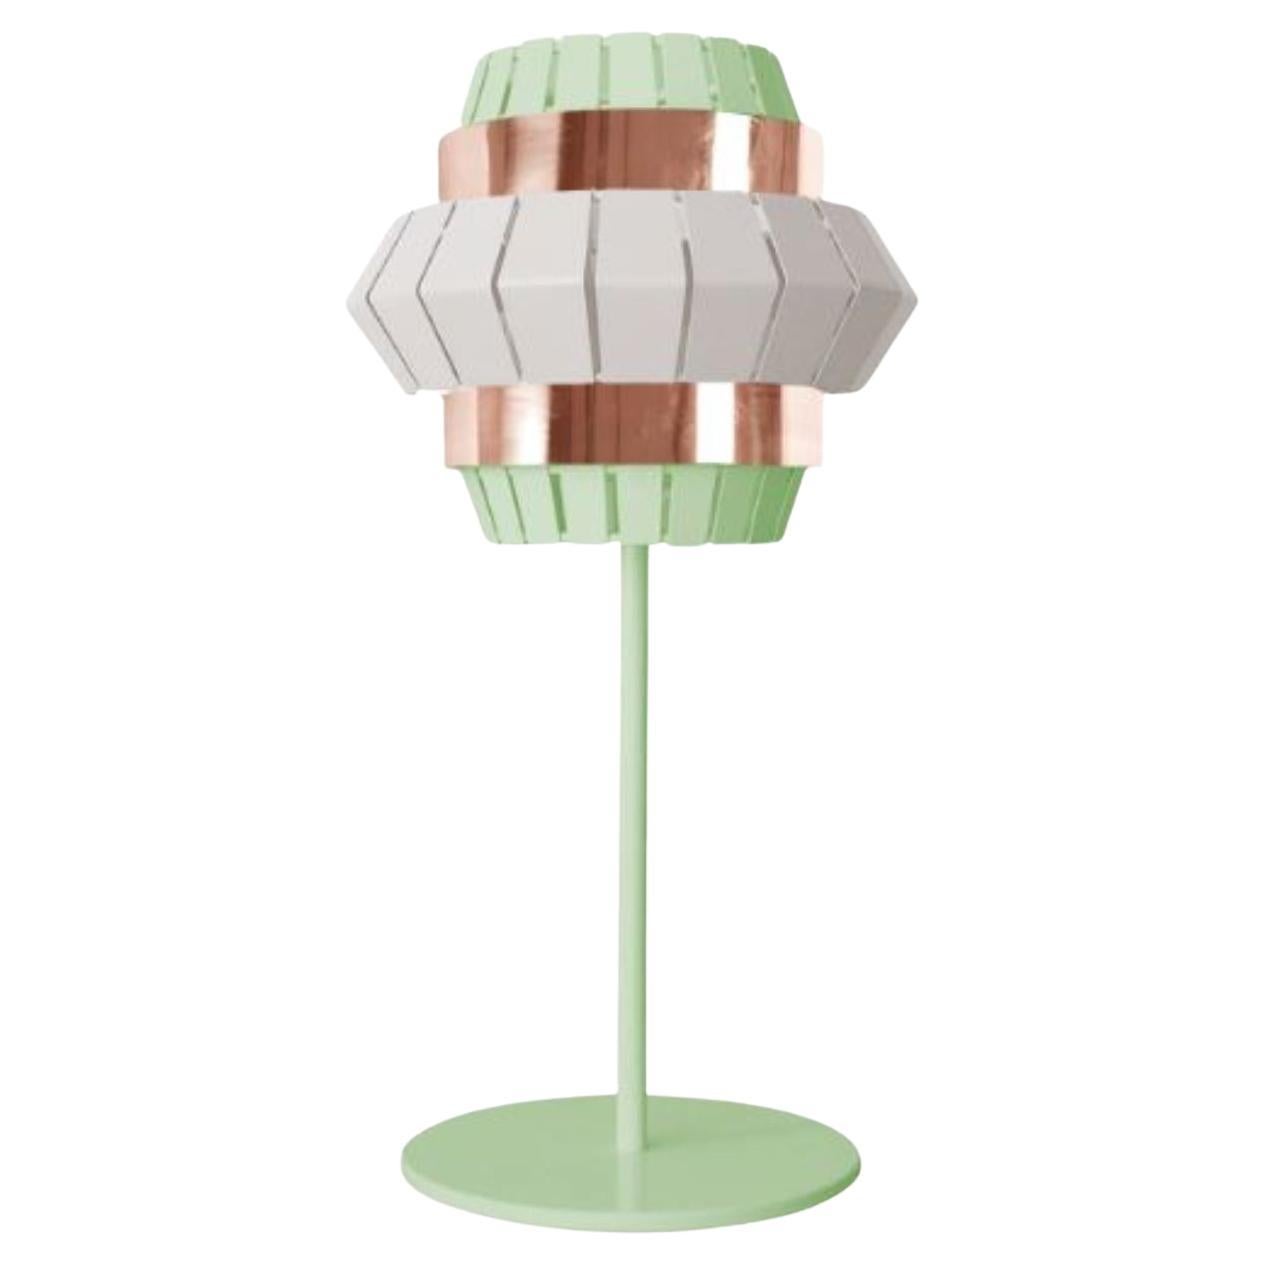 Ivory and Dream Comb Table Lamp with Copper Ring by Dooq